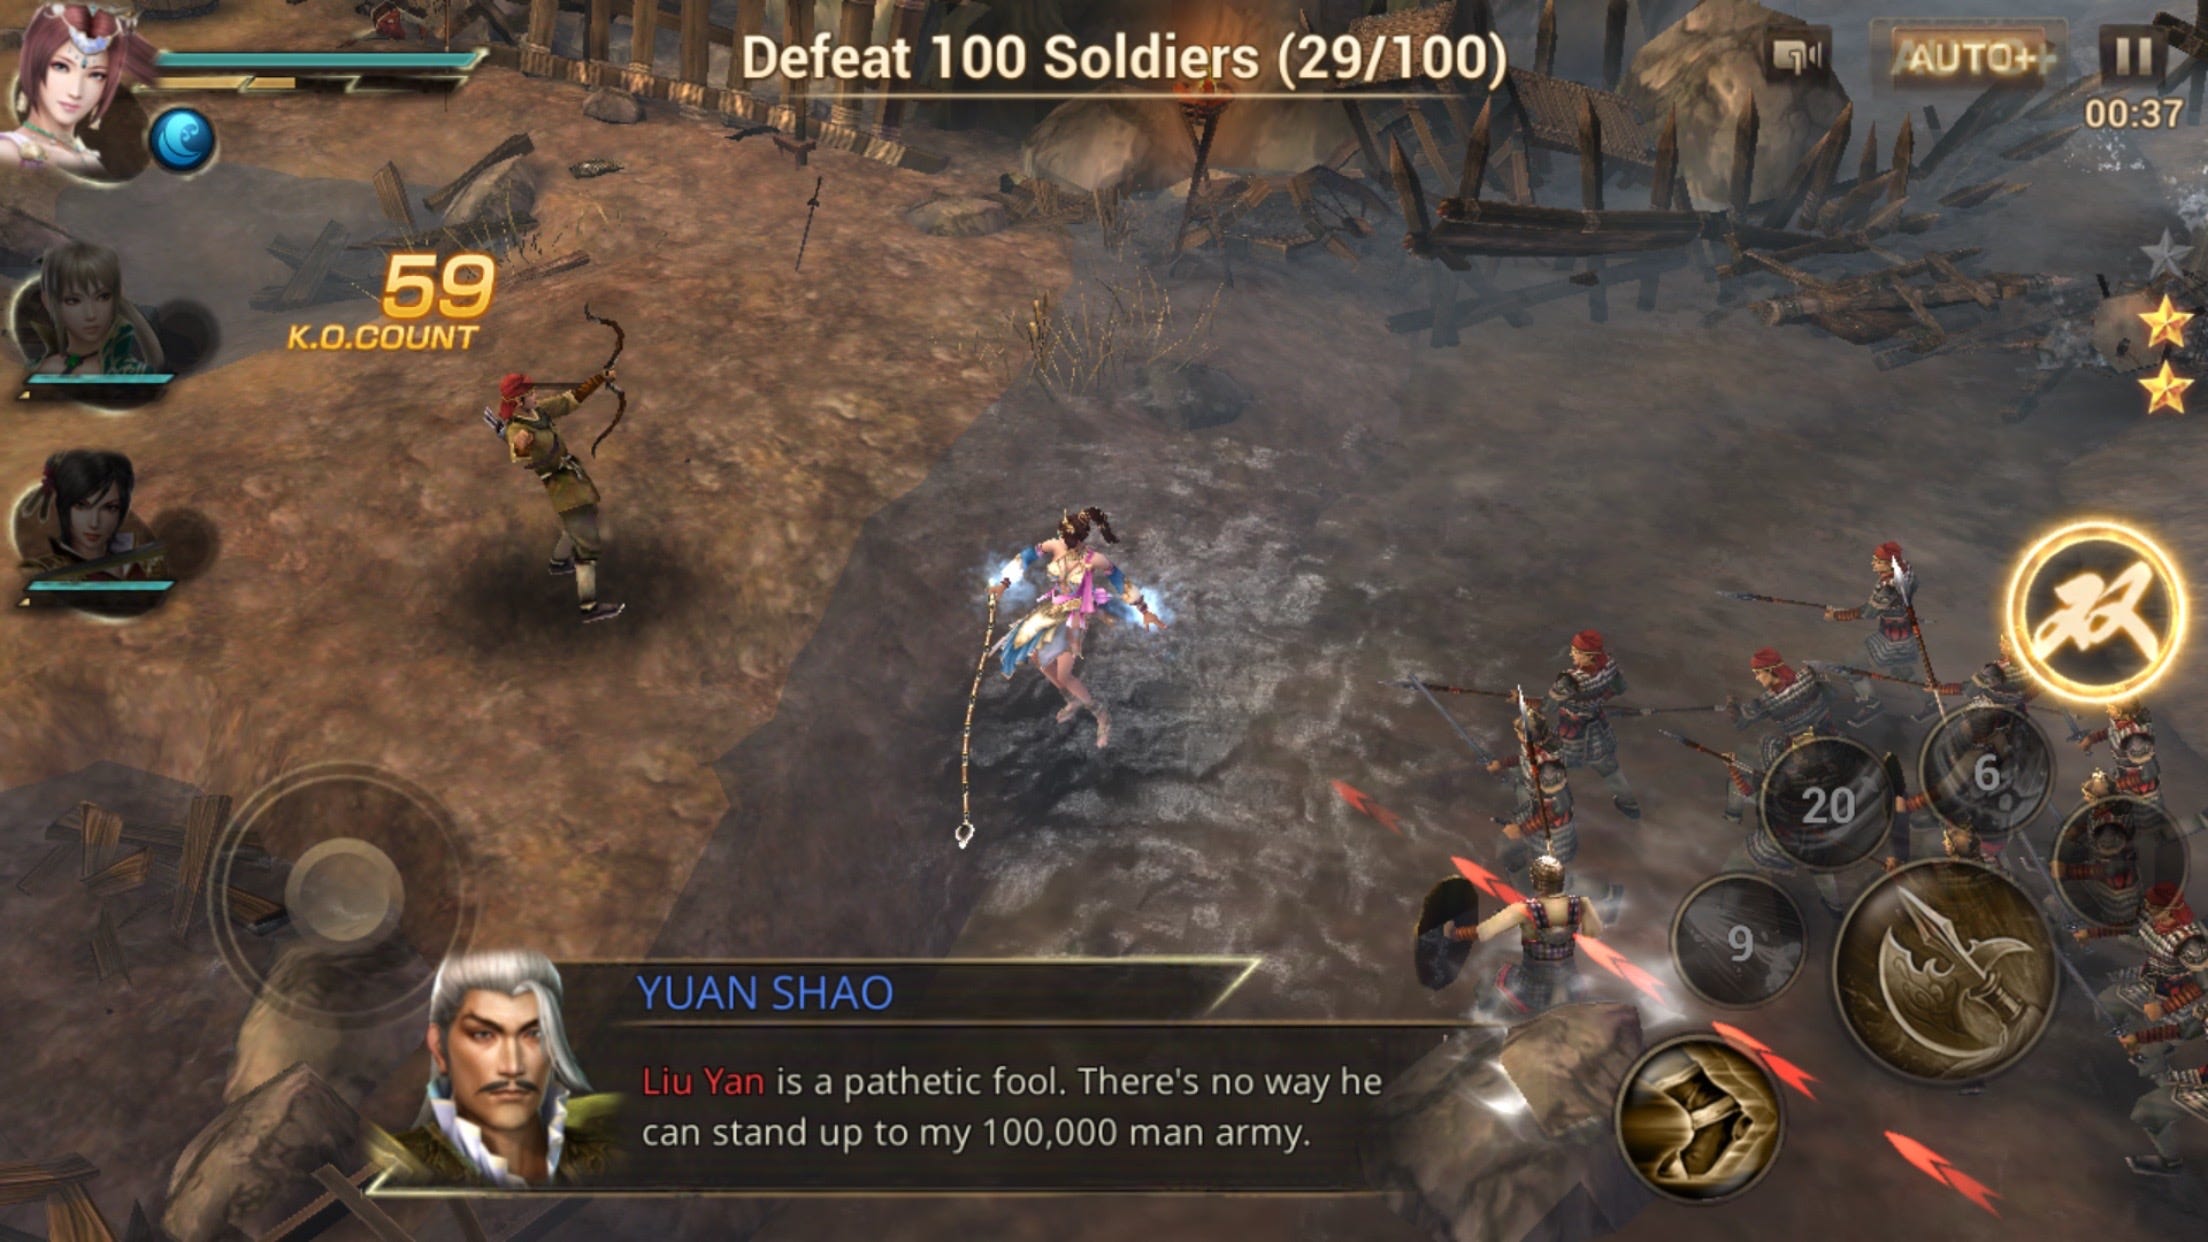 Finally we got a real Dynasty Warriors game on mobile guys! Just hope the  AI will be harder in following chapters : r/dynastywarriors